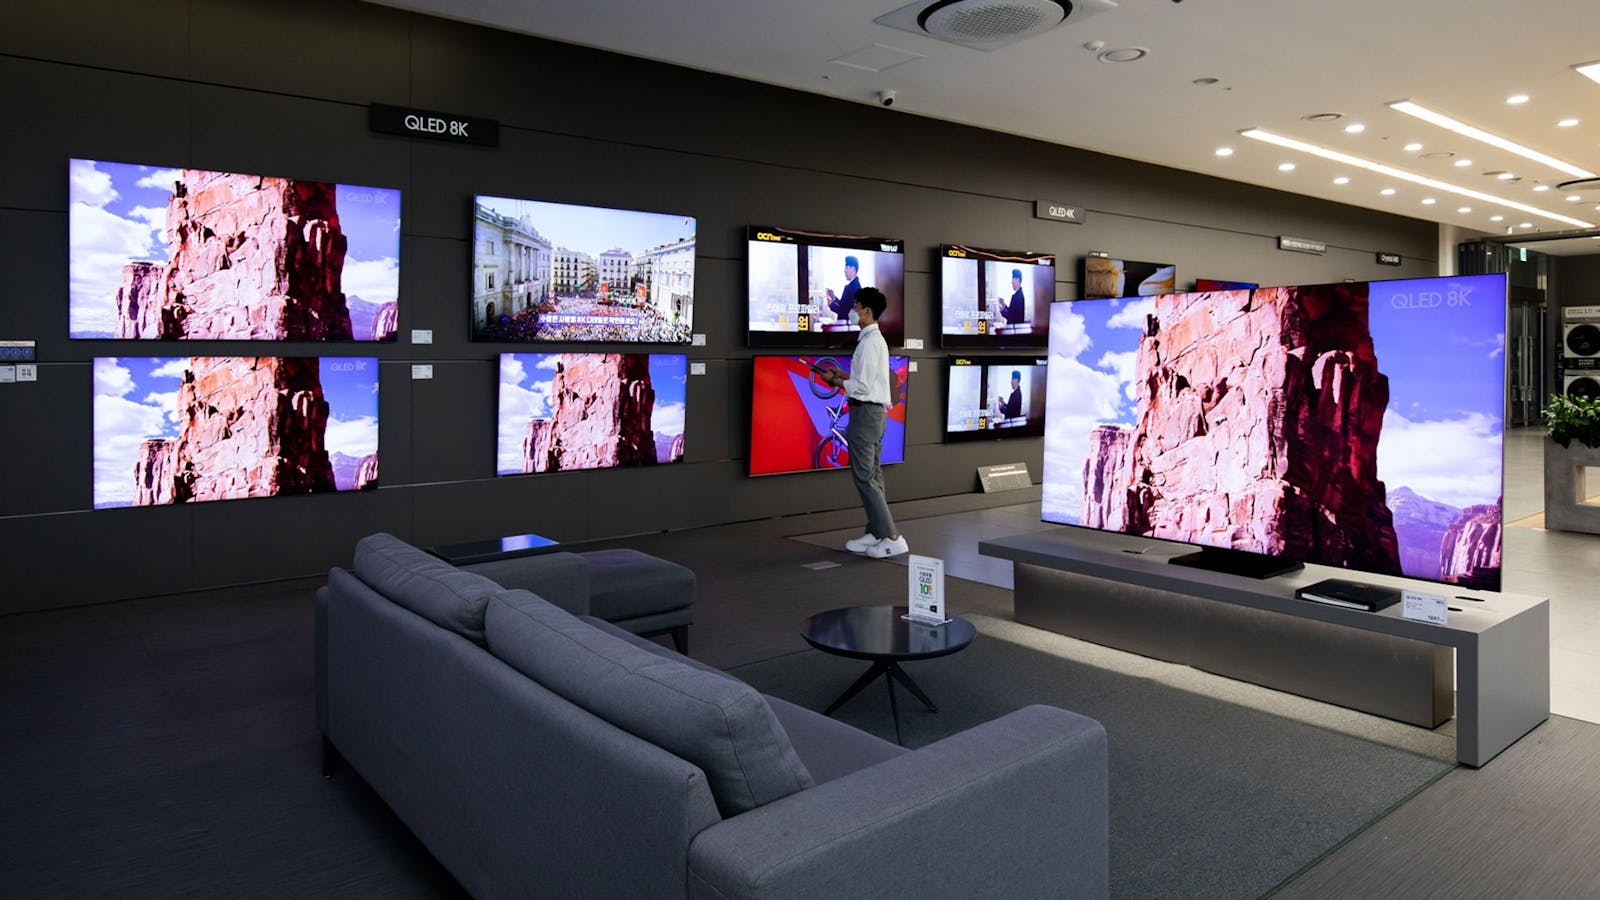 Samsung QLED televisions on display at the company's Digital Plaza store in Seoul. Photo by Bloomberg.